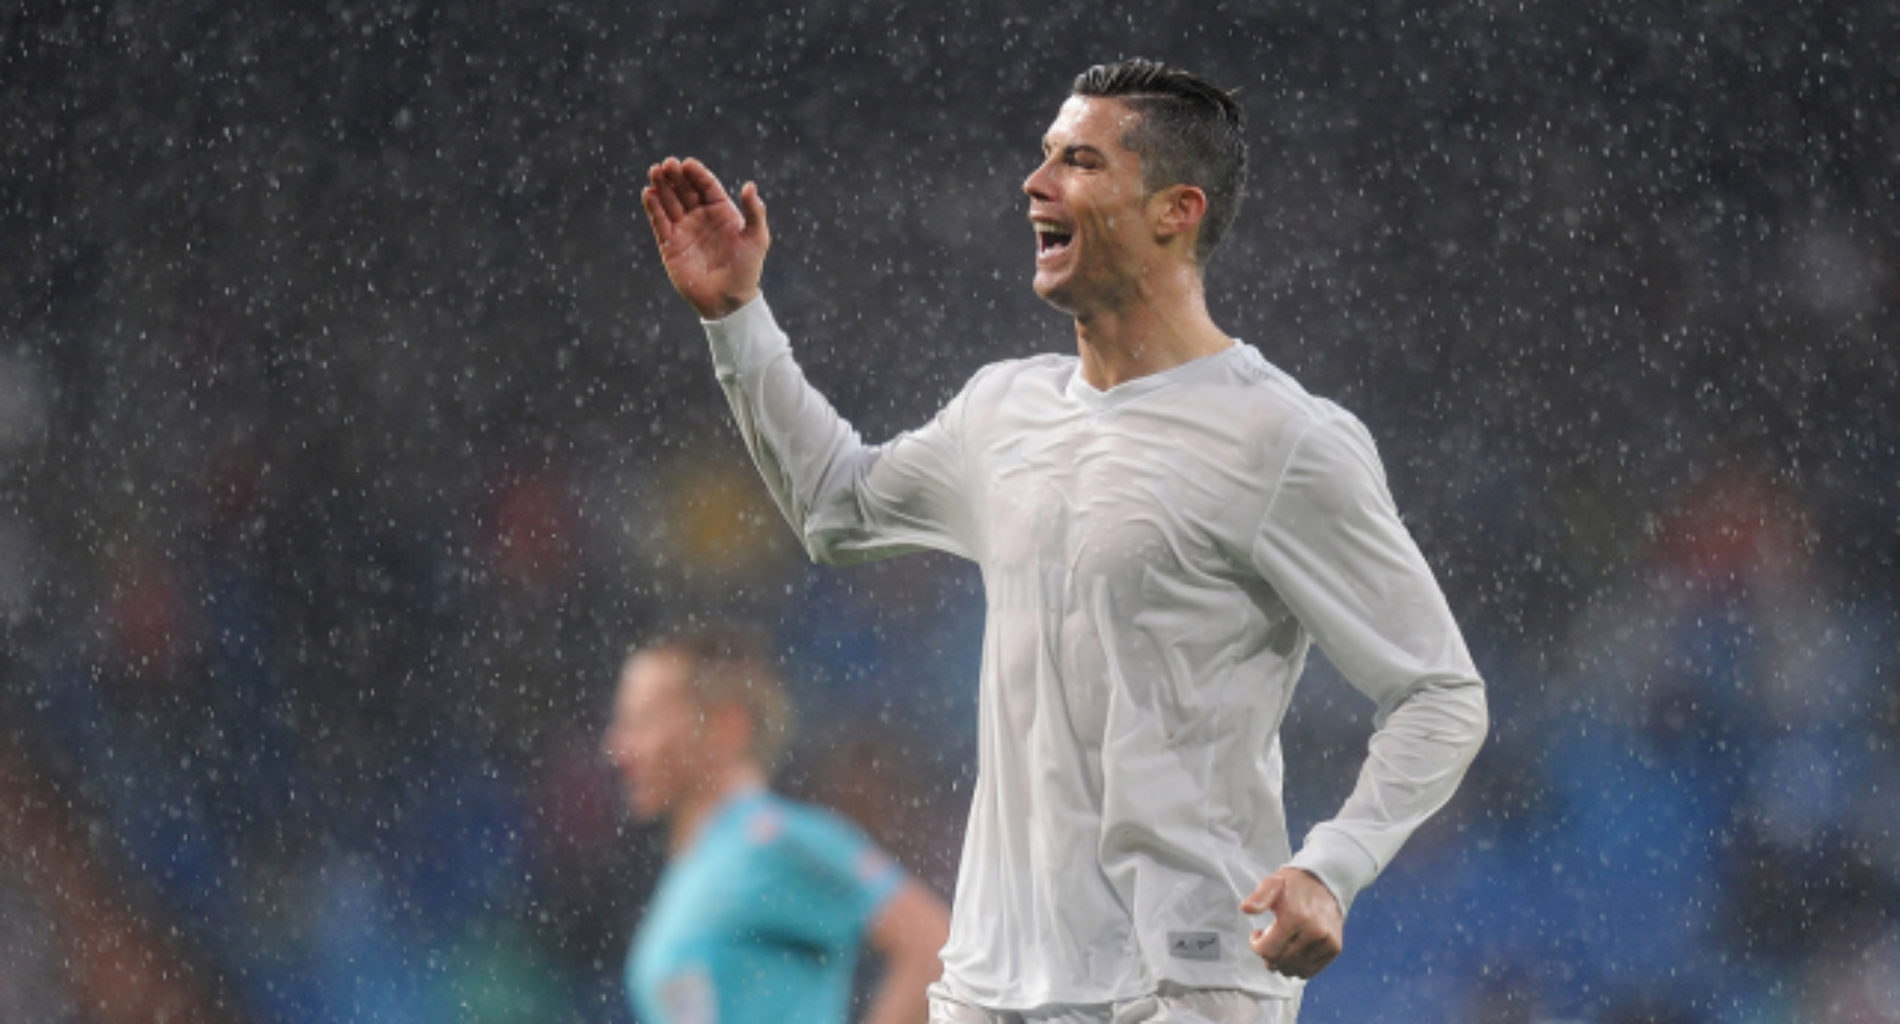 Cristiano Ronaldo targeted with homophobic abuse during game